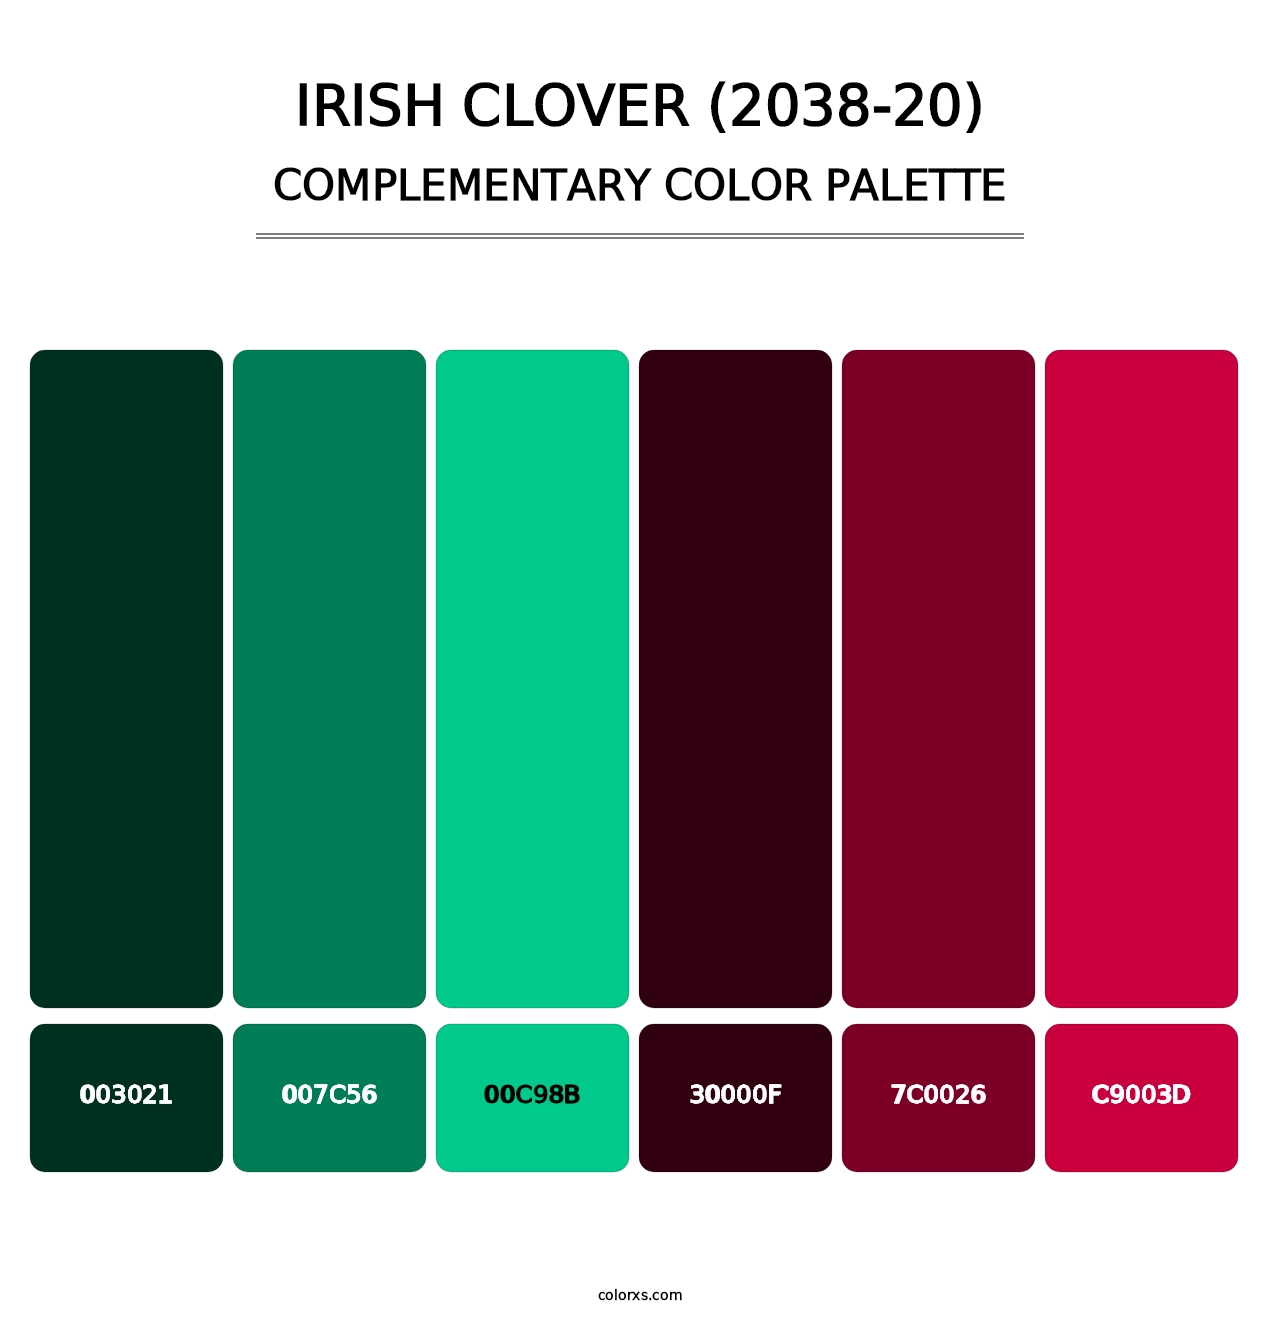 Irish Clover (2038-20) - Complementary Color Palette